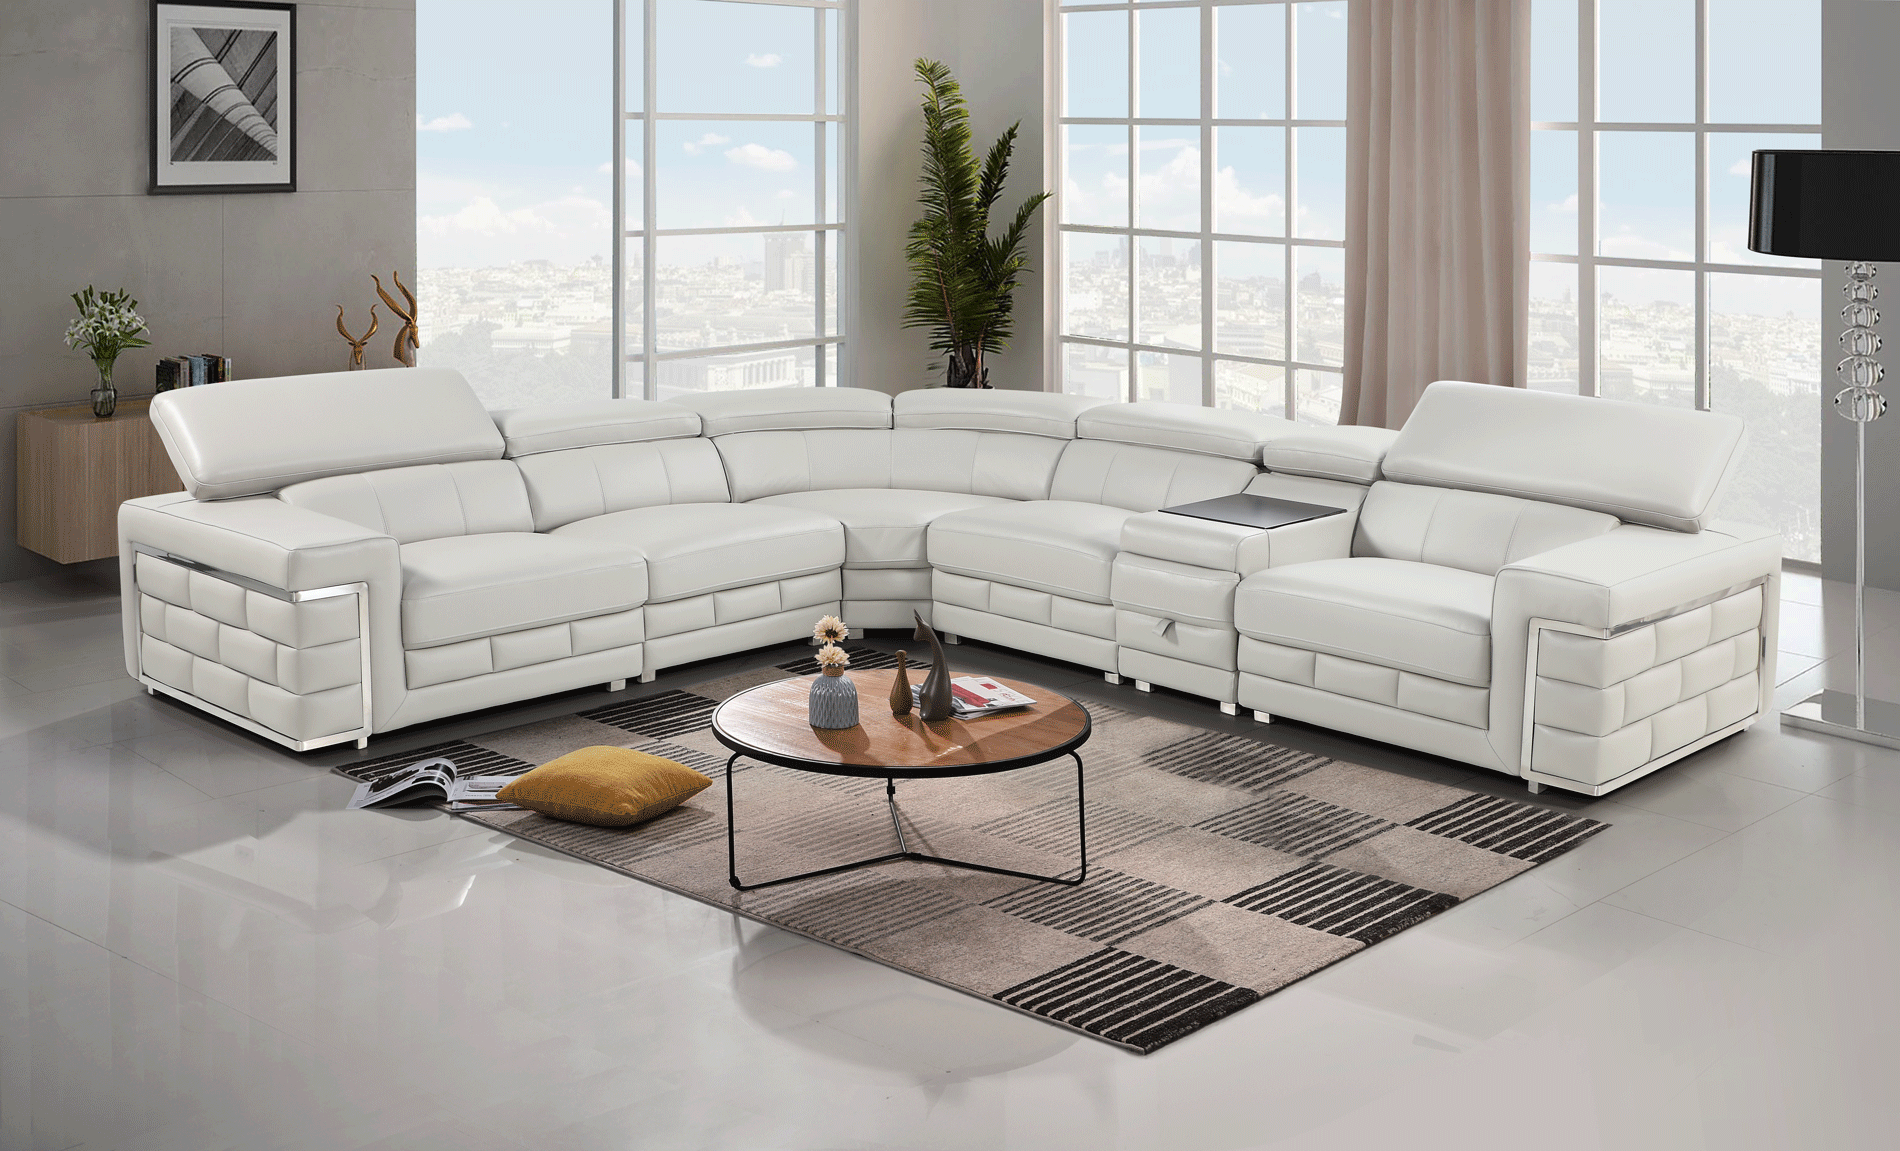 Living Room Furniture Sleepers Sofas Loveseats and Chairs 378 Sectional